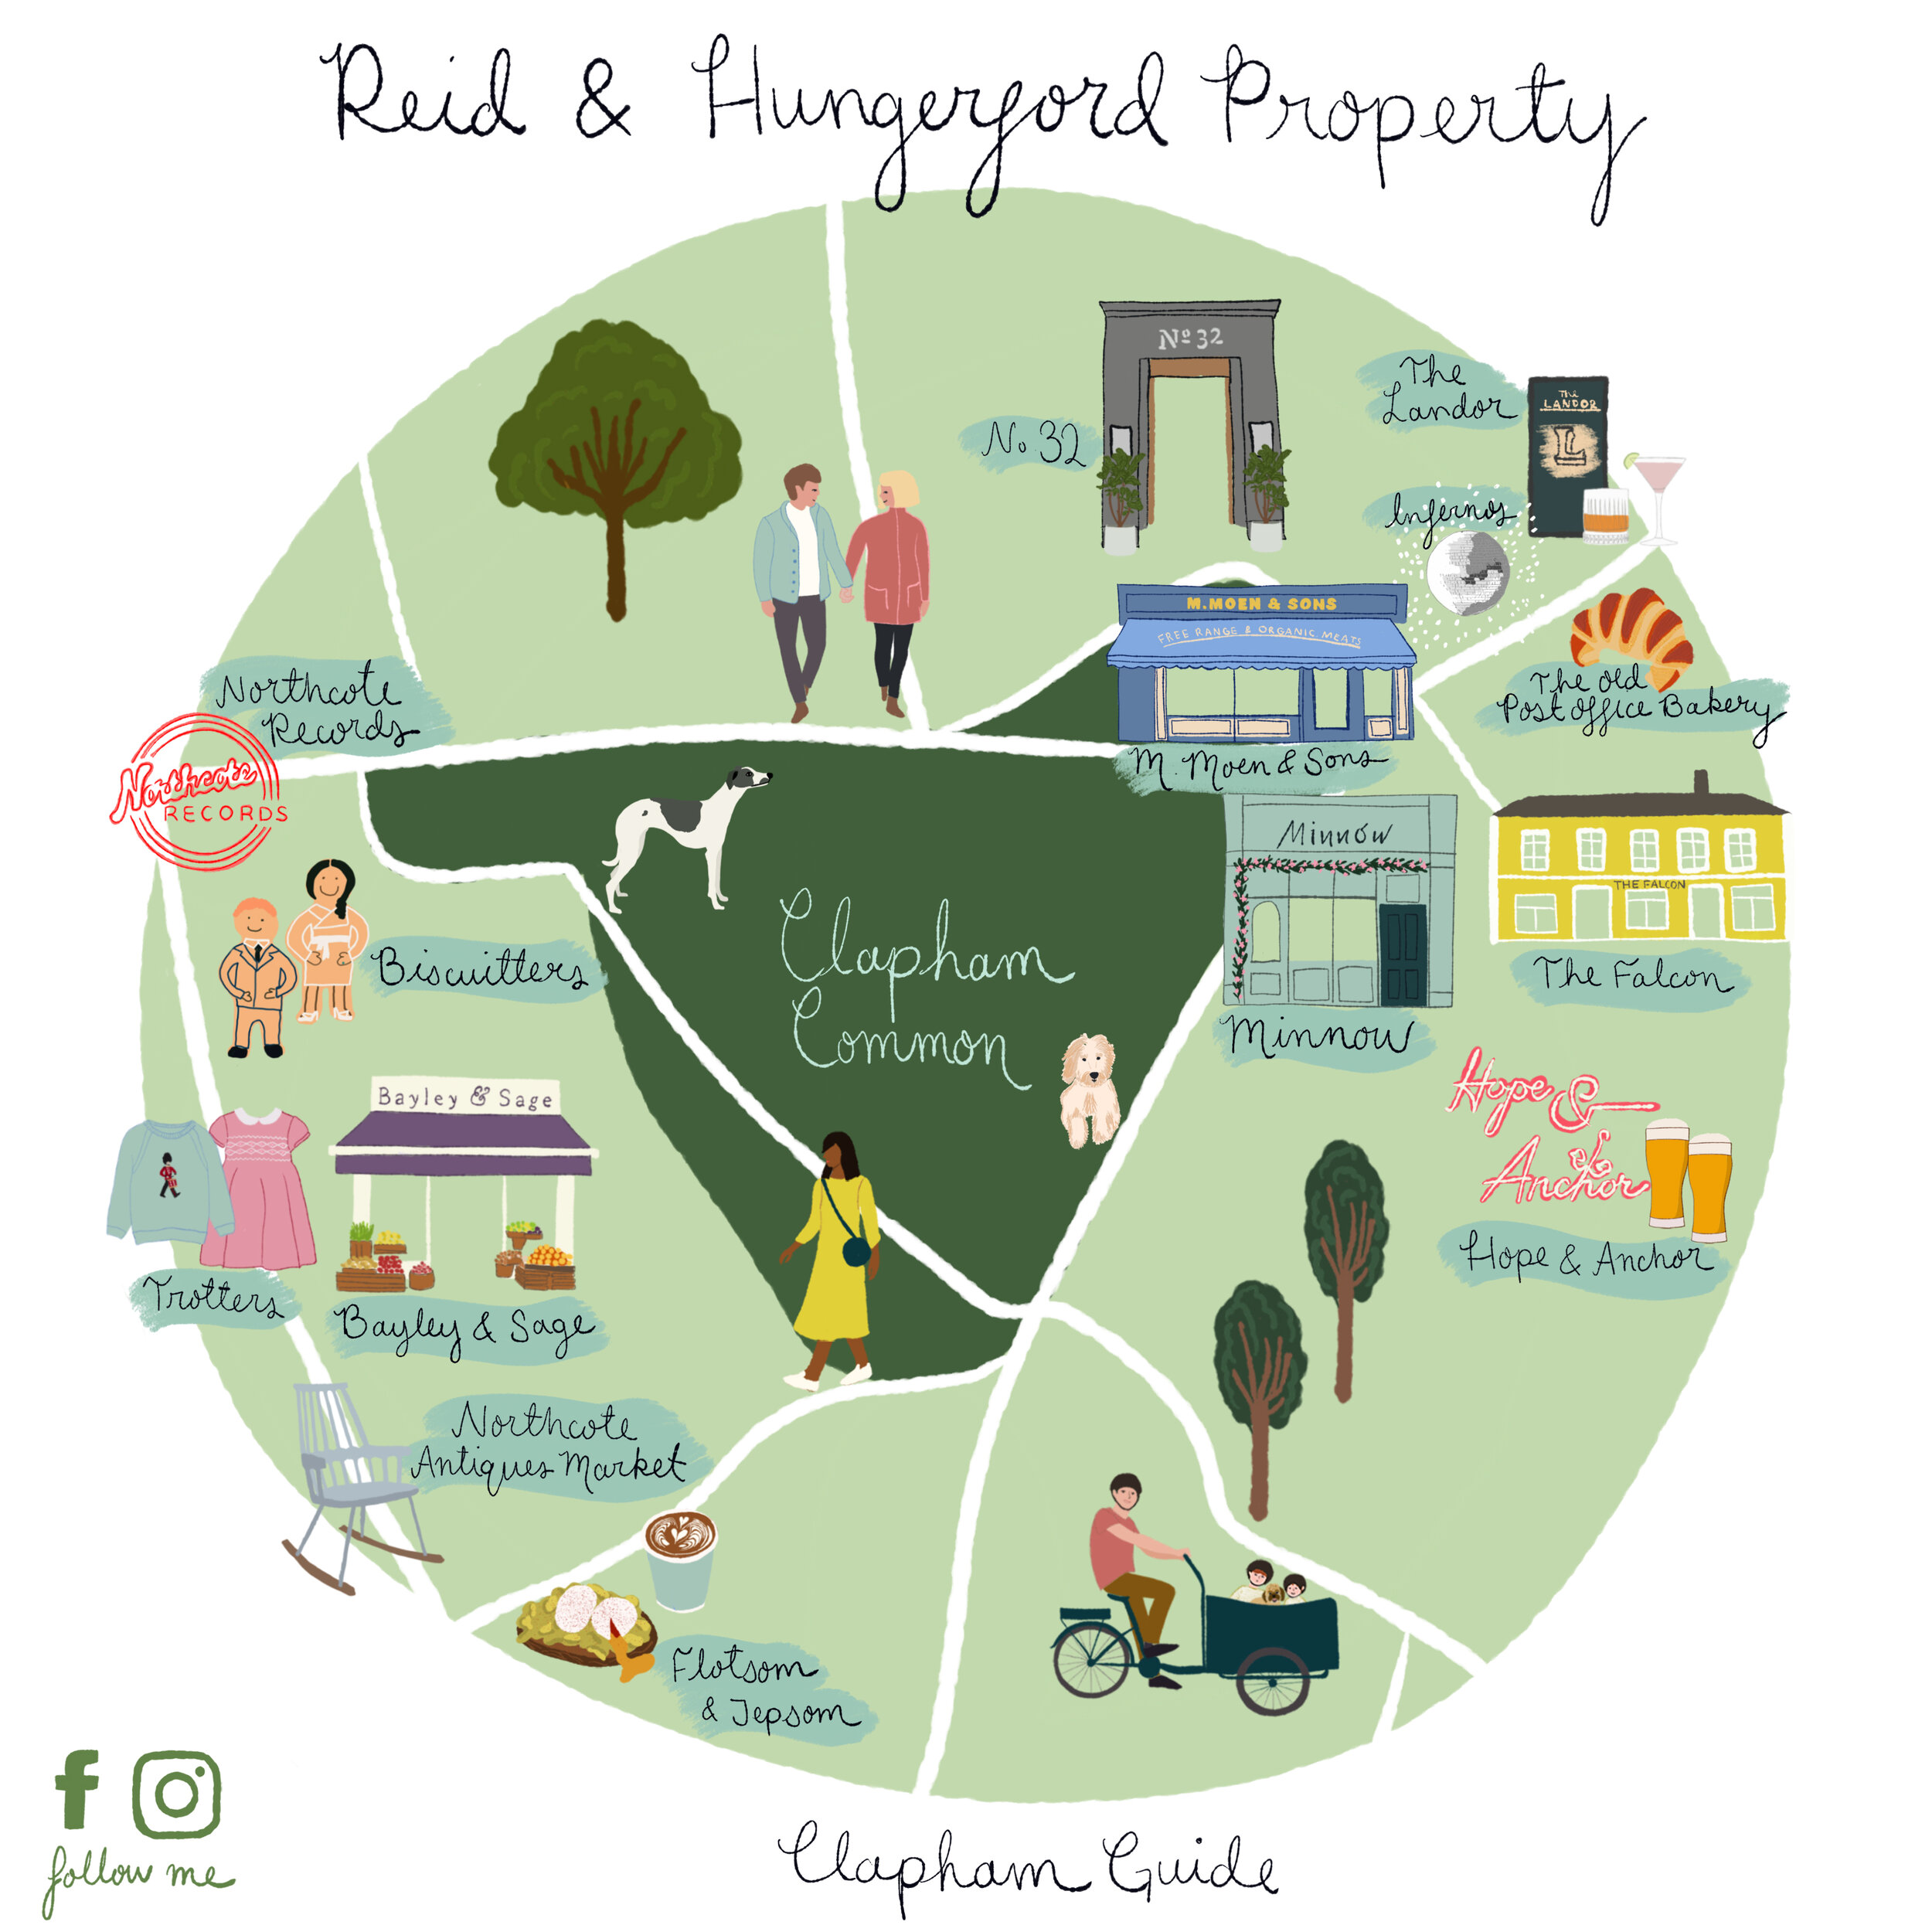 Reid and Hungerford Property with icons.jpg